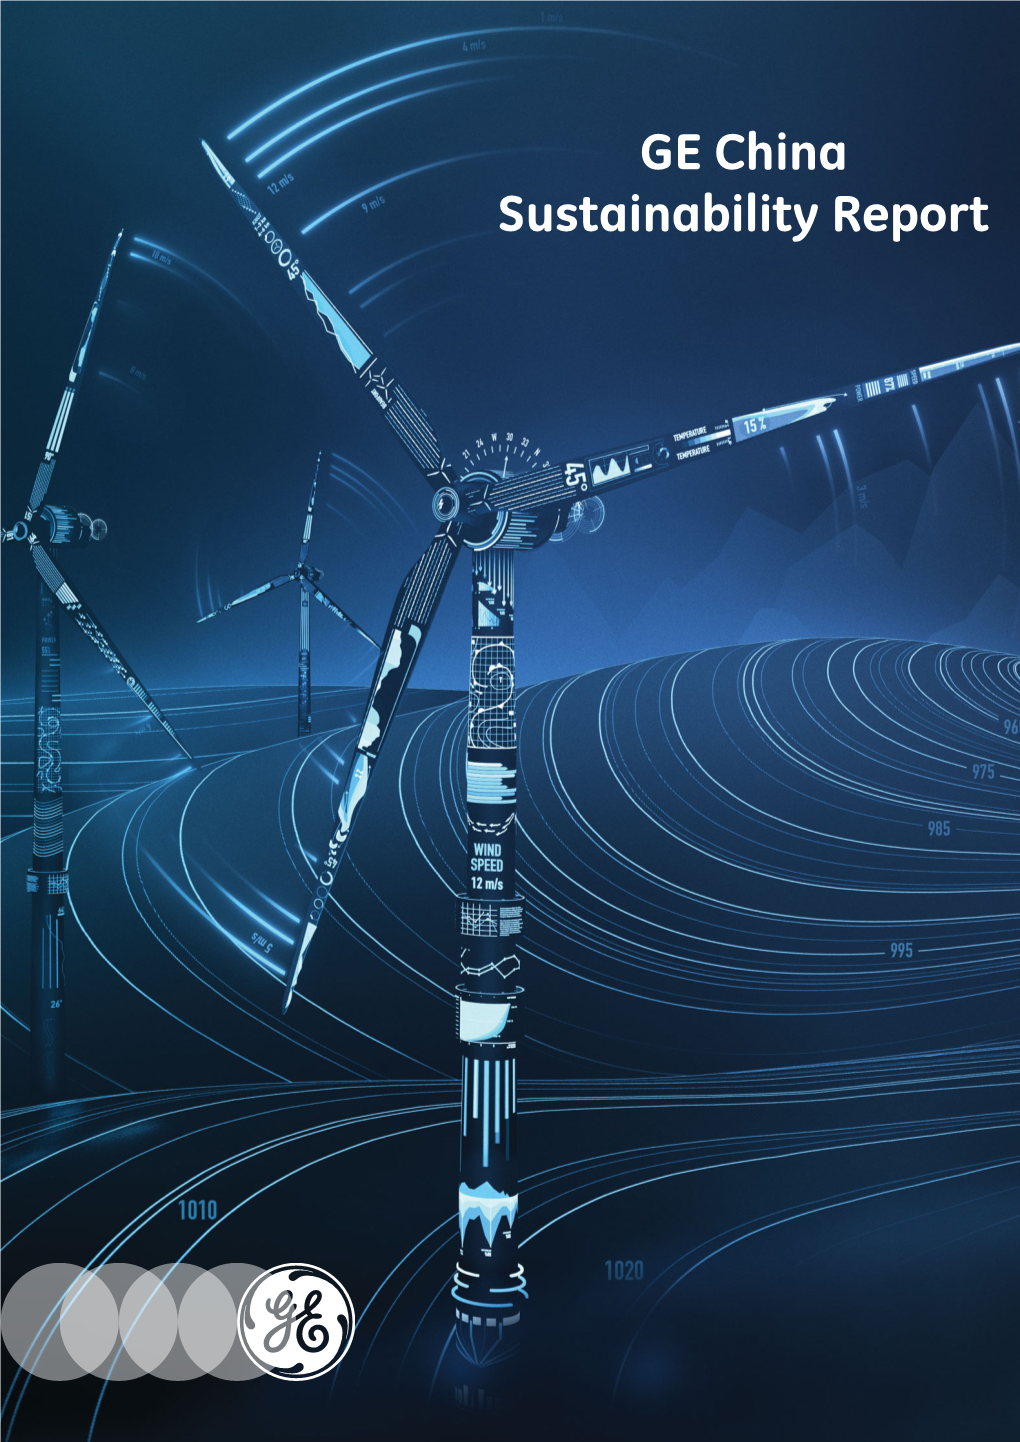 GE China Sustainability Report Table of Contents